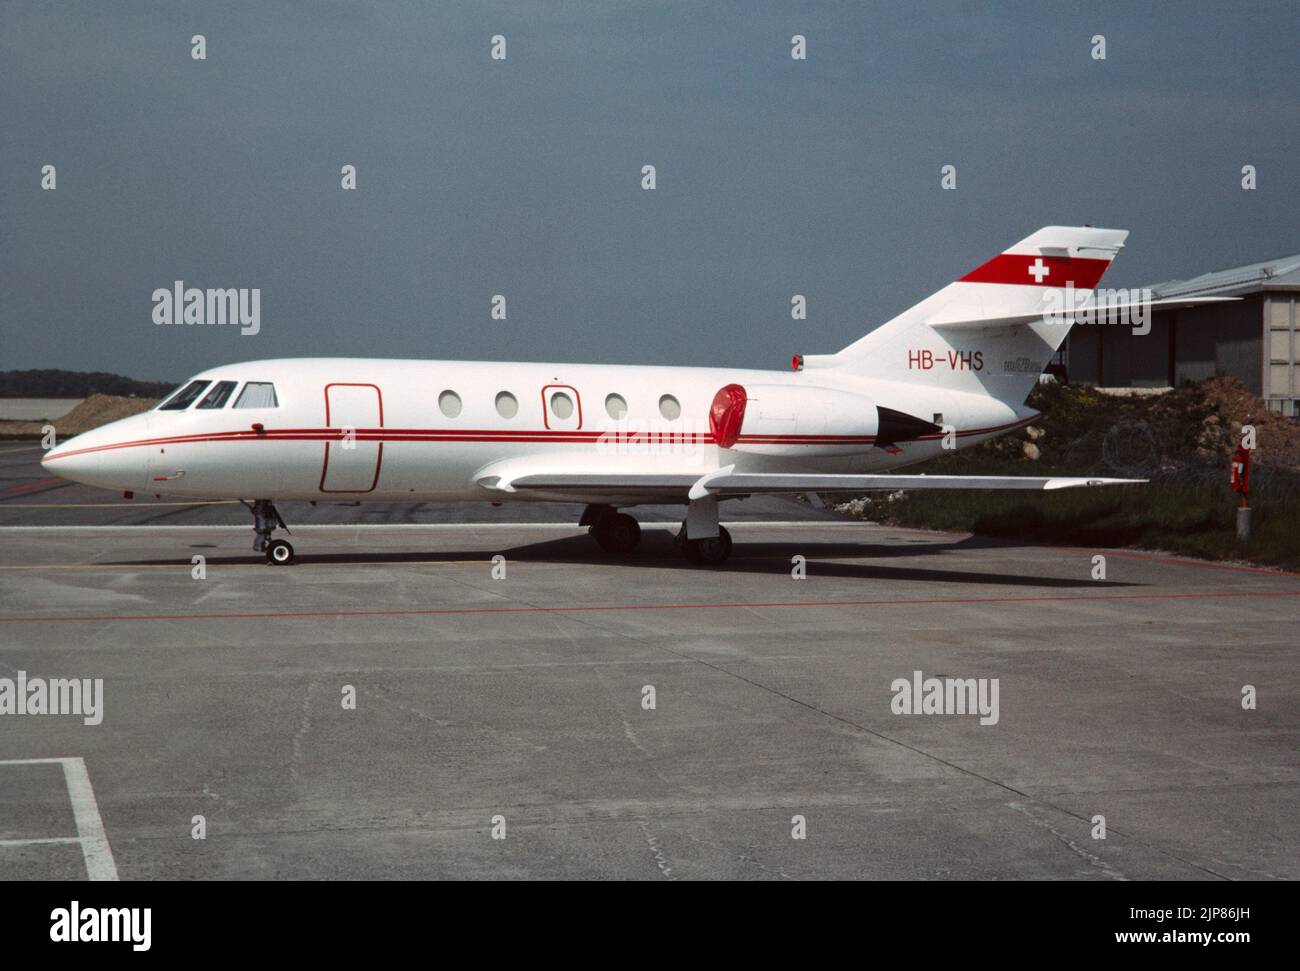 A Dassault Falcon 200 Business, executive, private, corporate Jet, registered in Switzerland as HB-VHS. Photo taken in 1984. Stock Photo